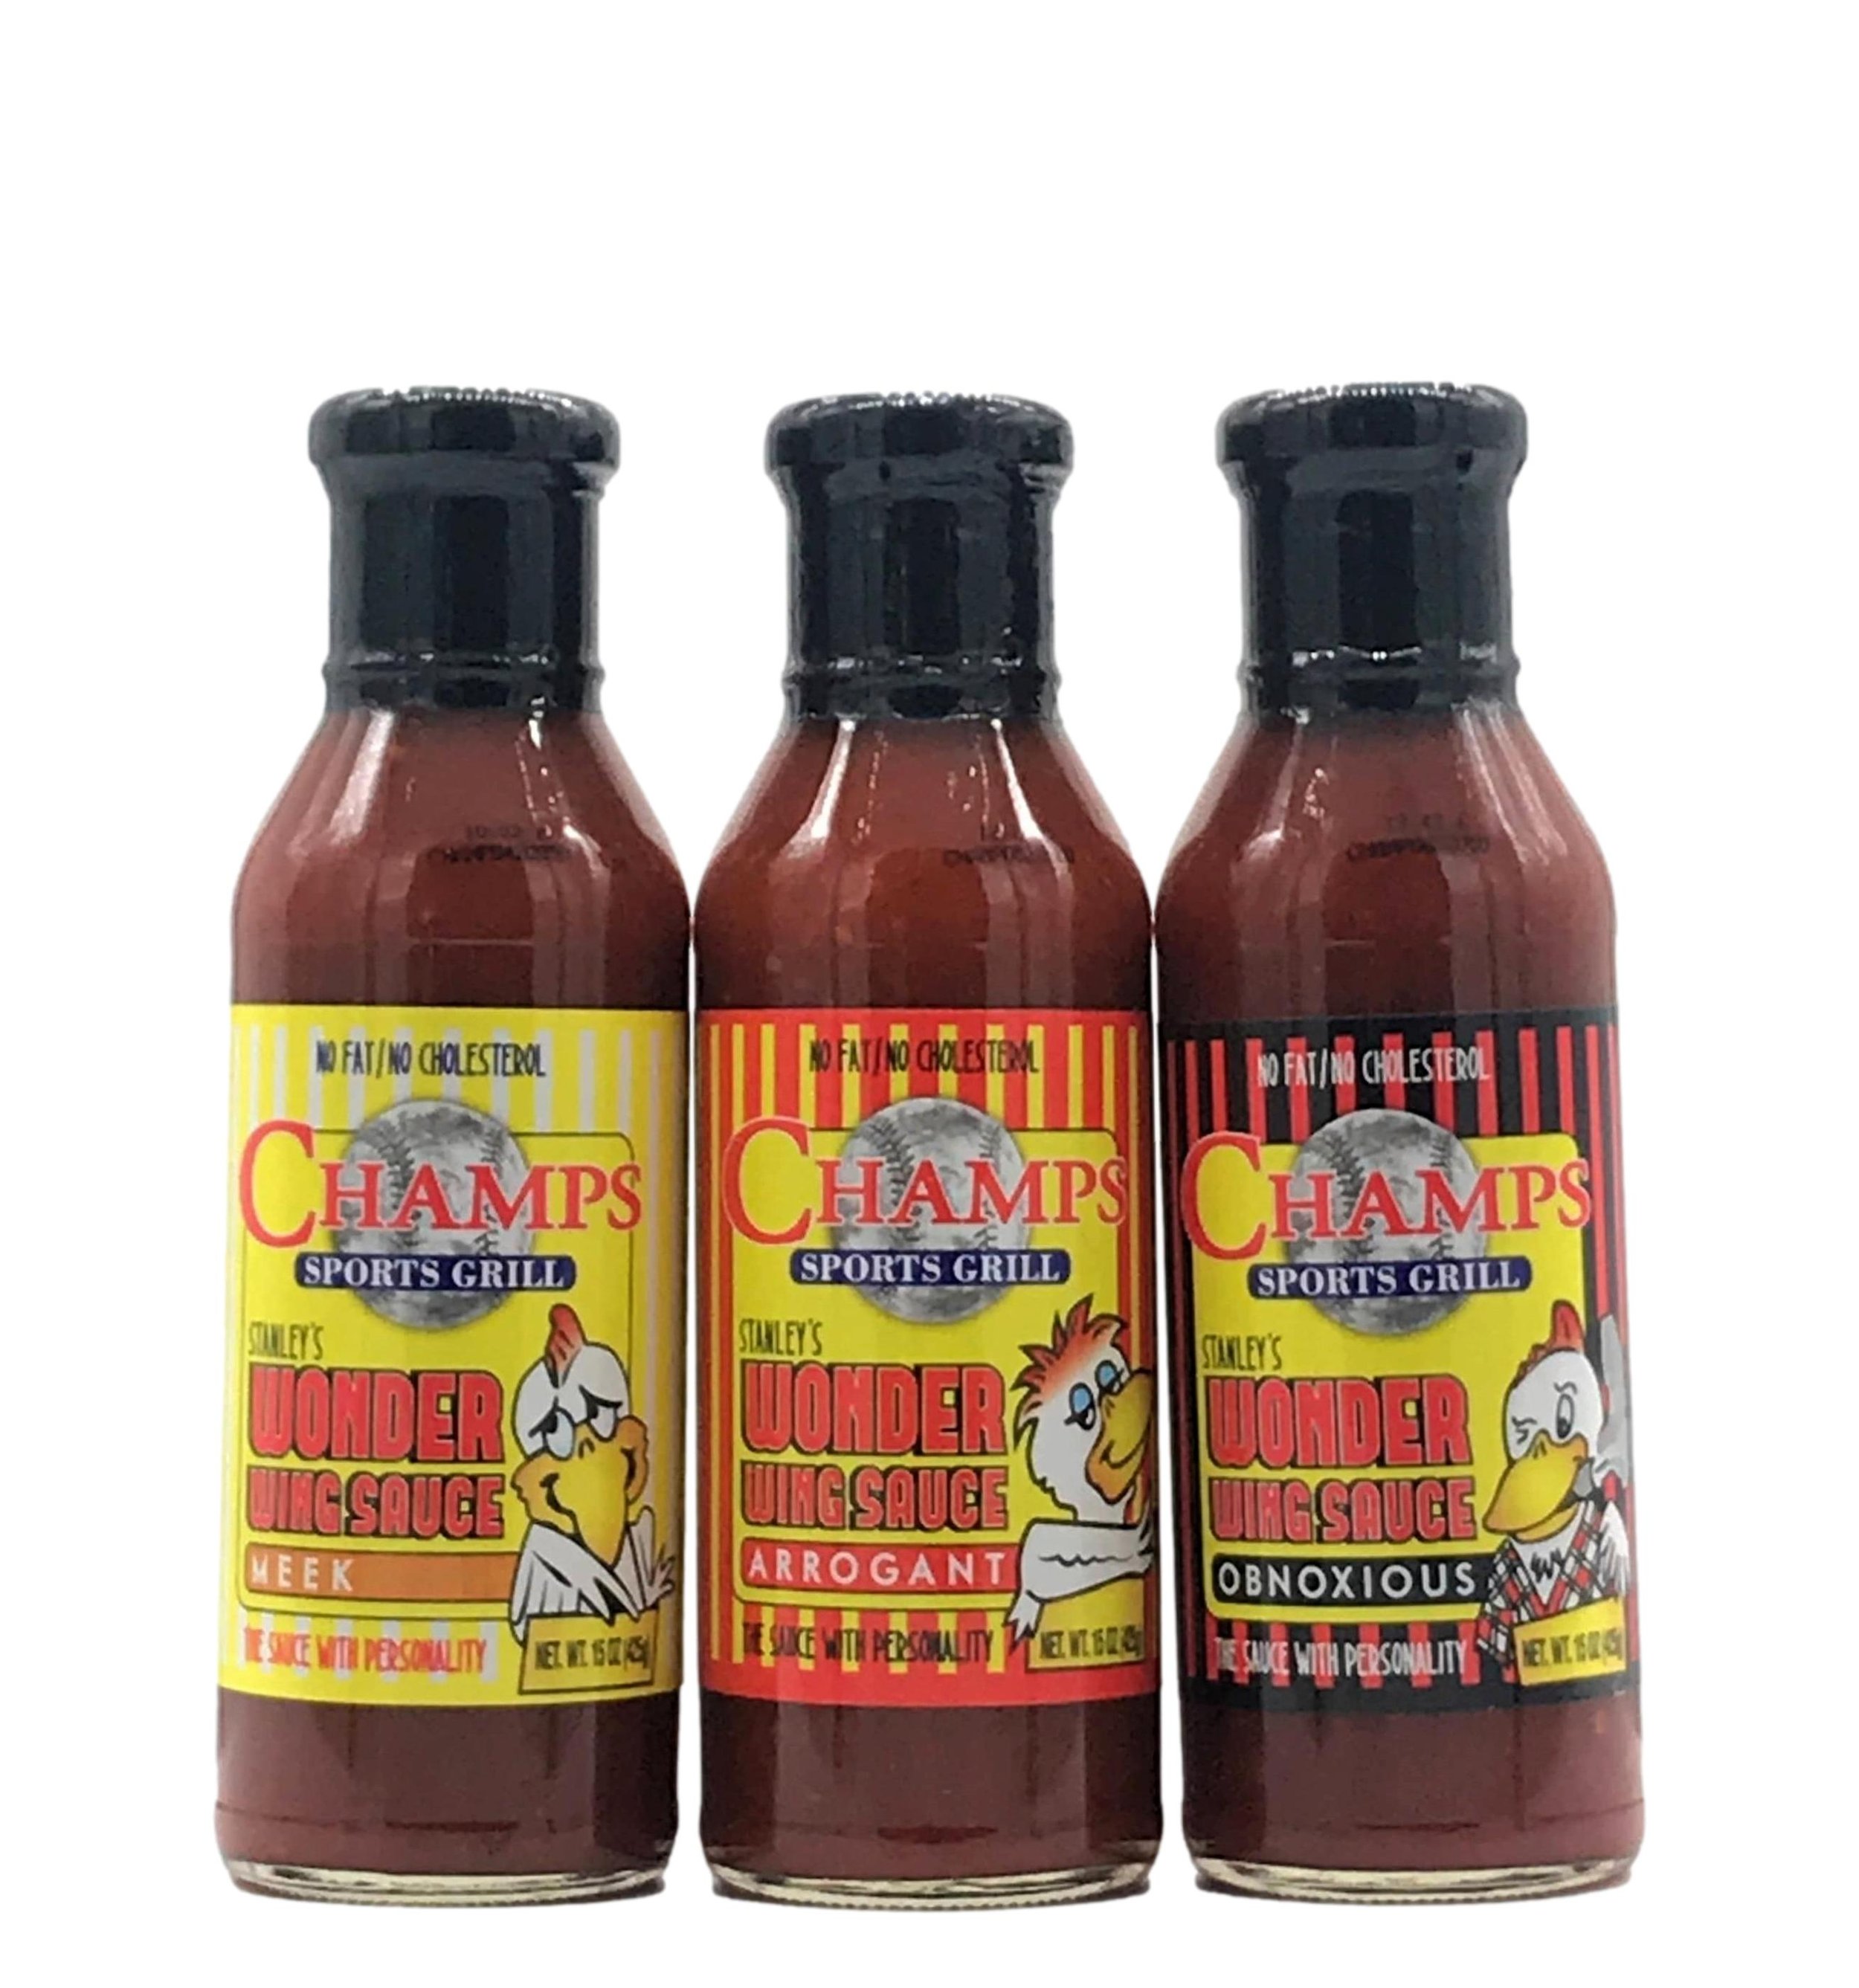 Stanley's Wonder Wing Sauce by Champs